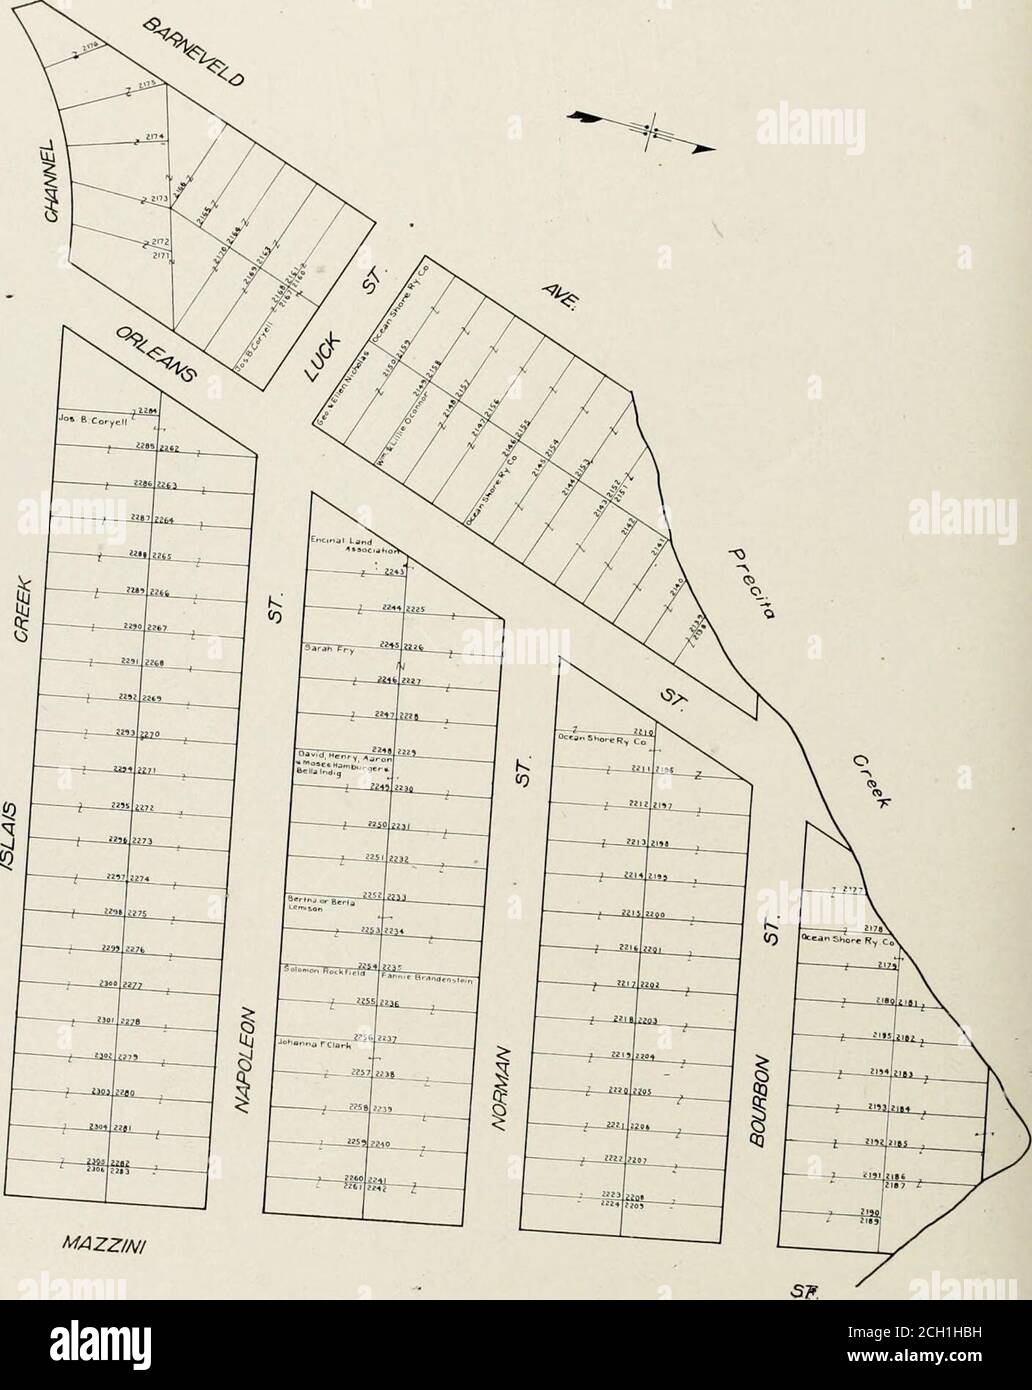 . The San Francisco block book. comprising Park Lane Tract, Market Street Homestead Ass'n., Stanford Heights, Sunnyside, City Land Ass'n., Lakeview, West End Homestead, University Mound Homestead Ass'n., Excelsior Homestead, Reis Tract, South San Francisco Homestead and Railroad Ass'n., Tide Lands, etc. : showing size of lots and blocks and names of owners, compiled from latest official records . SAX IKAXCISCU HOMESTEADS GIFT MAP m4. MAZZINI SAX IK.XCISCO HOMESTEADS GIFT MAP NQ4 r-   ^  ^ i  Stock Photo